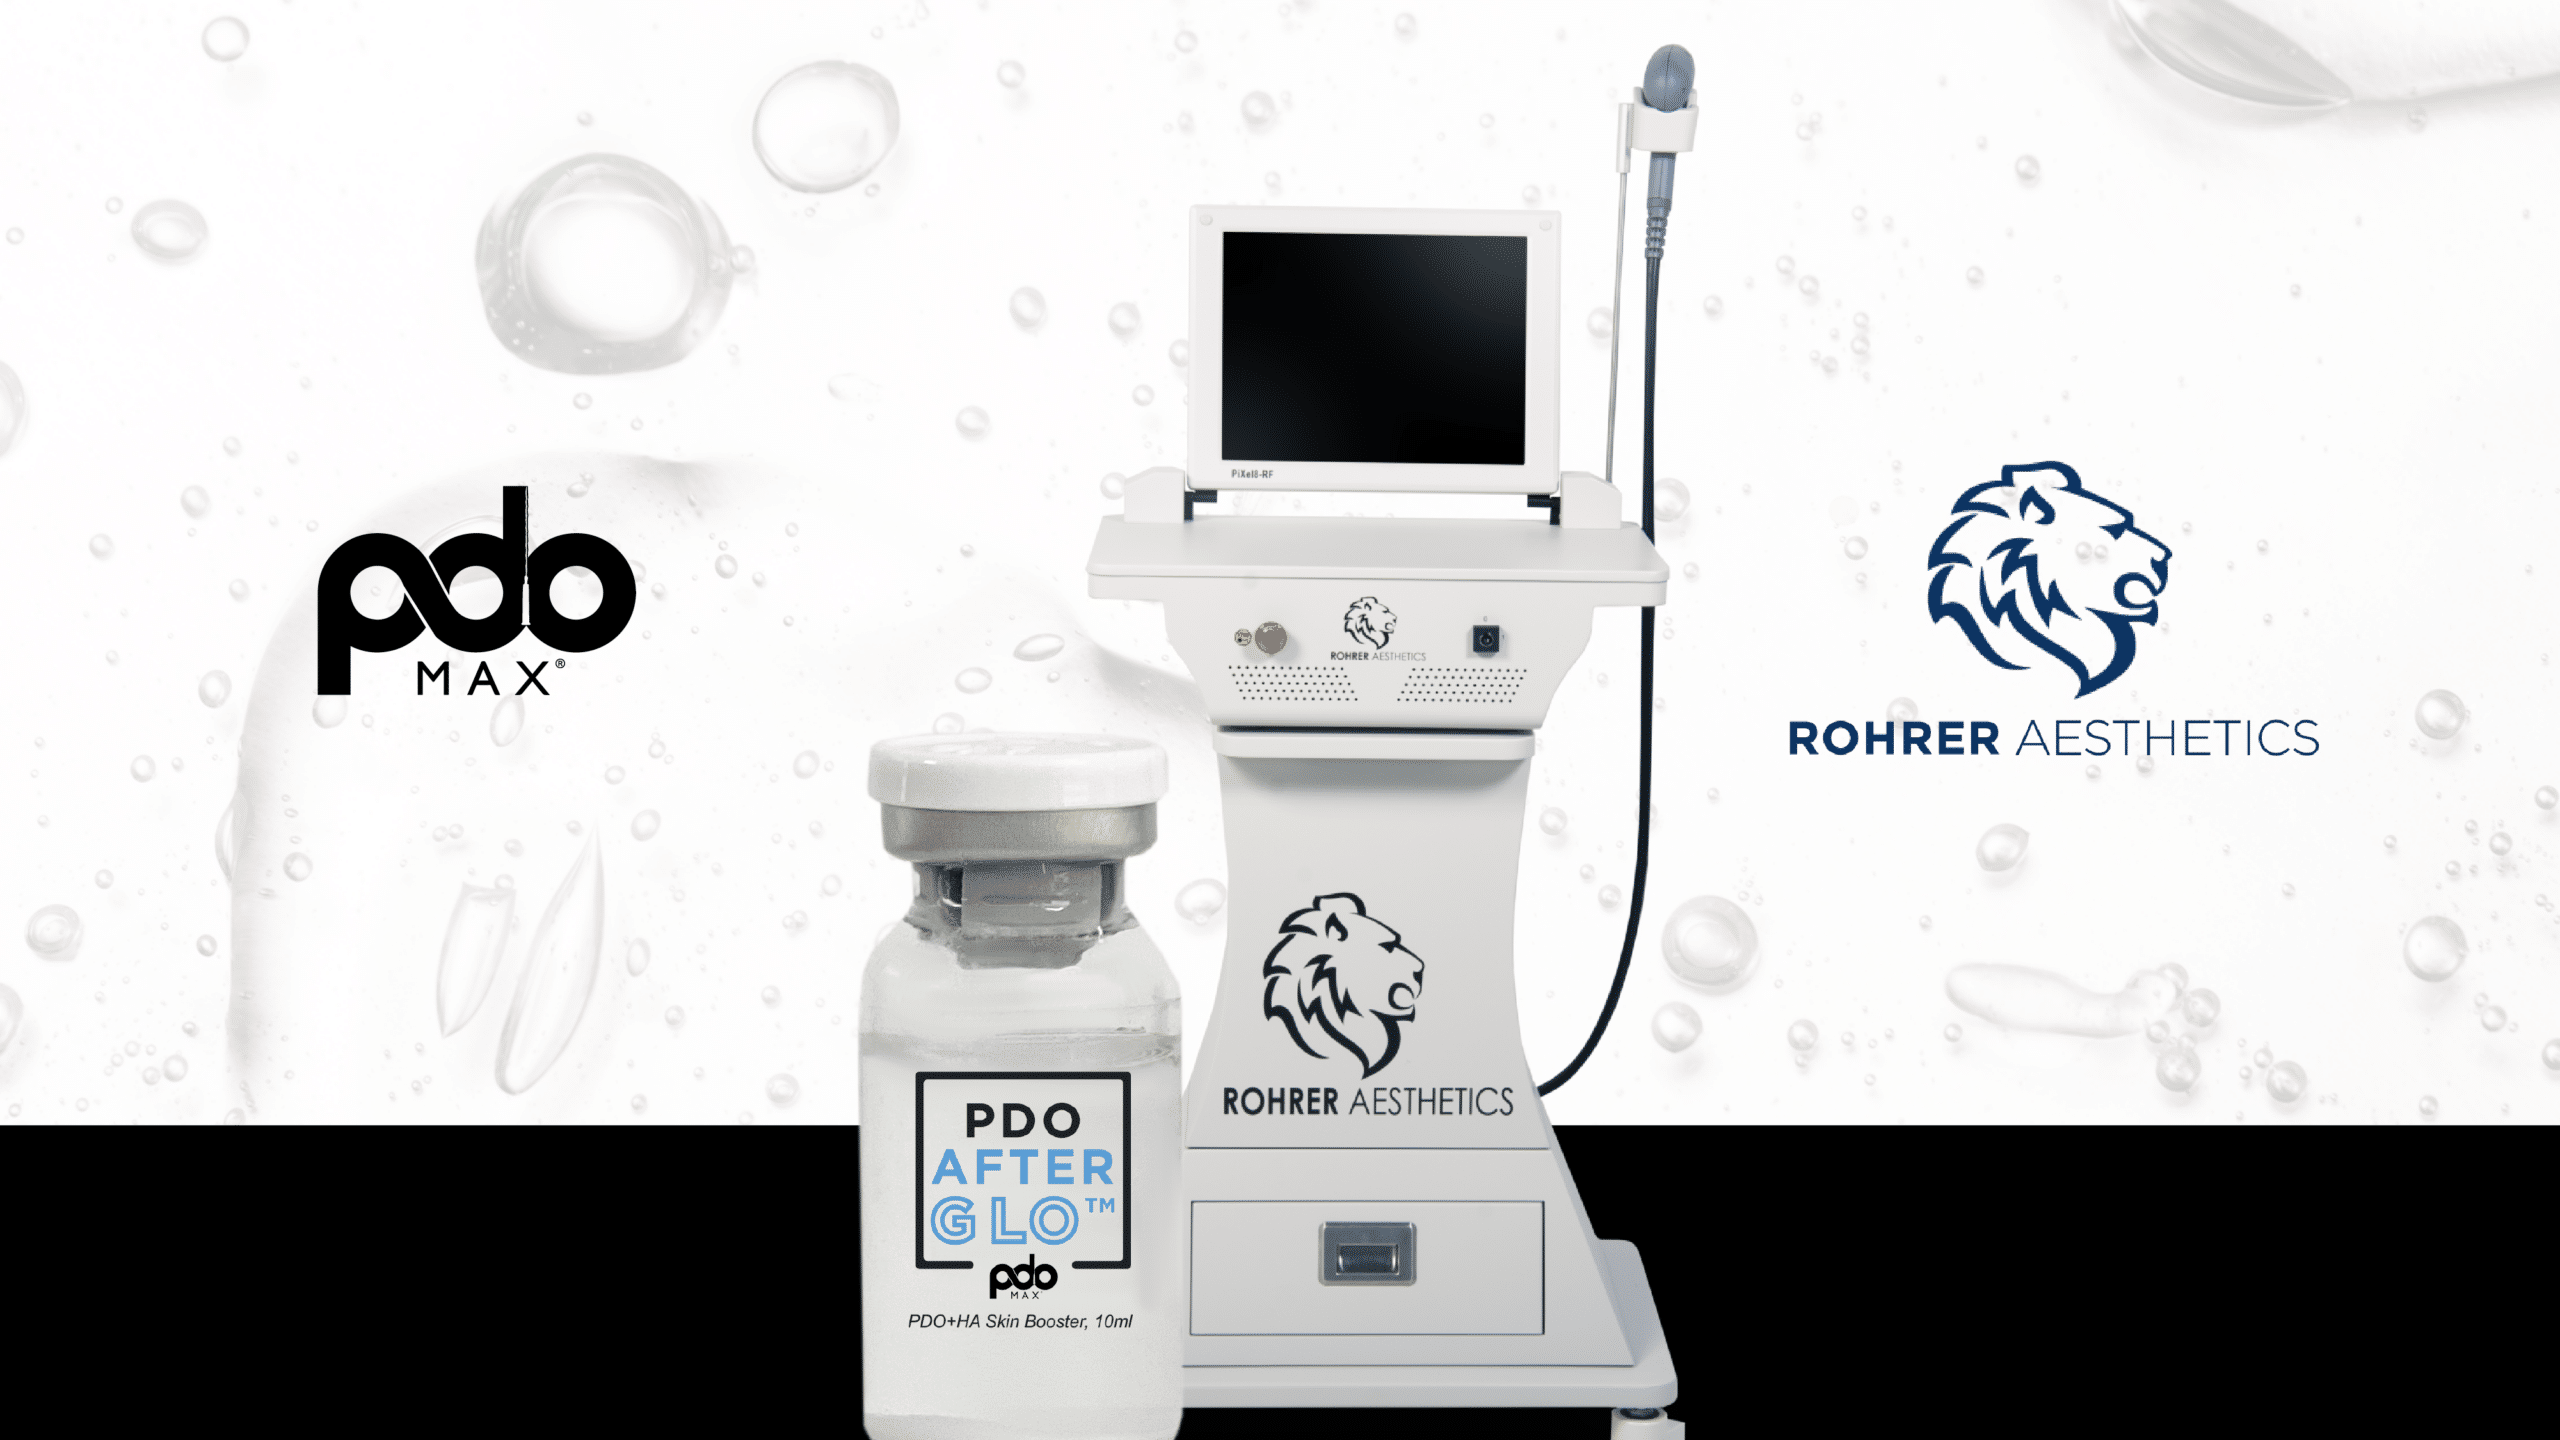 PDO Max® and Rohrer Aesthetics Team Up to Offer PDO AfterGlo™, the